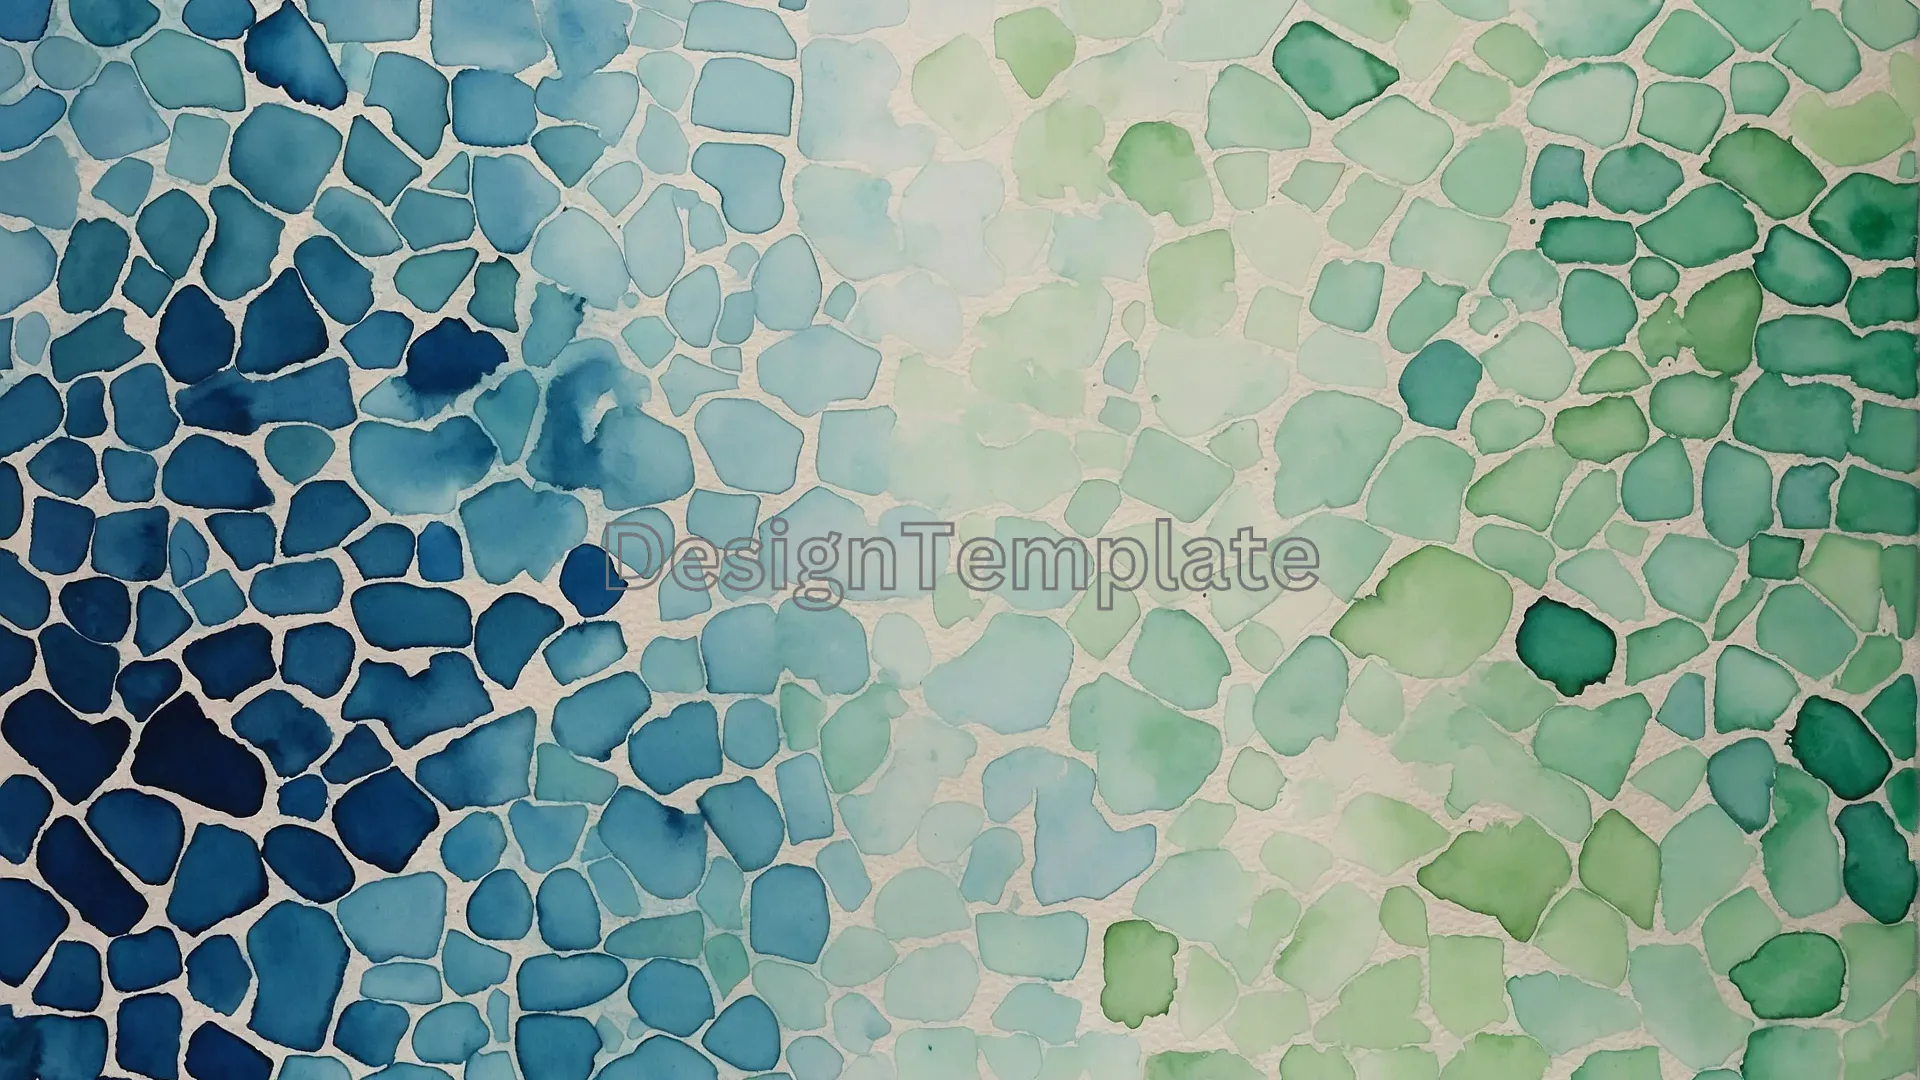 Watercolor Paint Abstract Background Texture Jpg